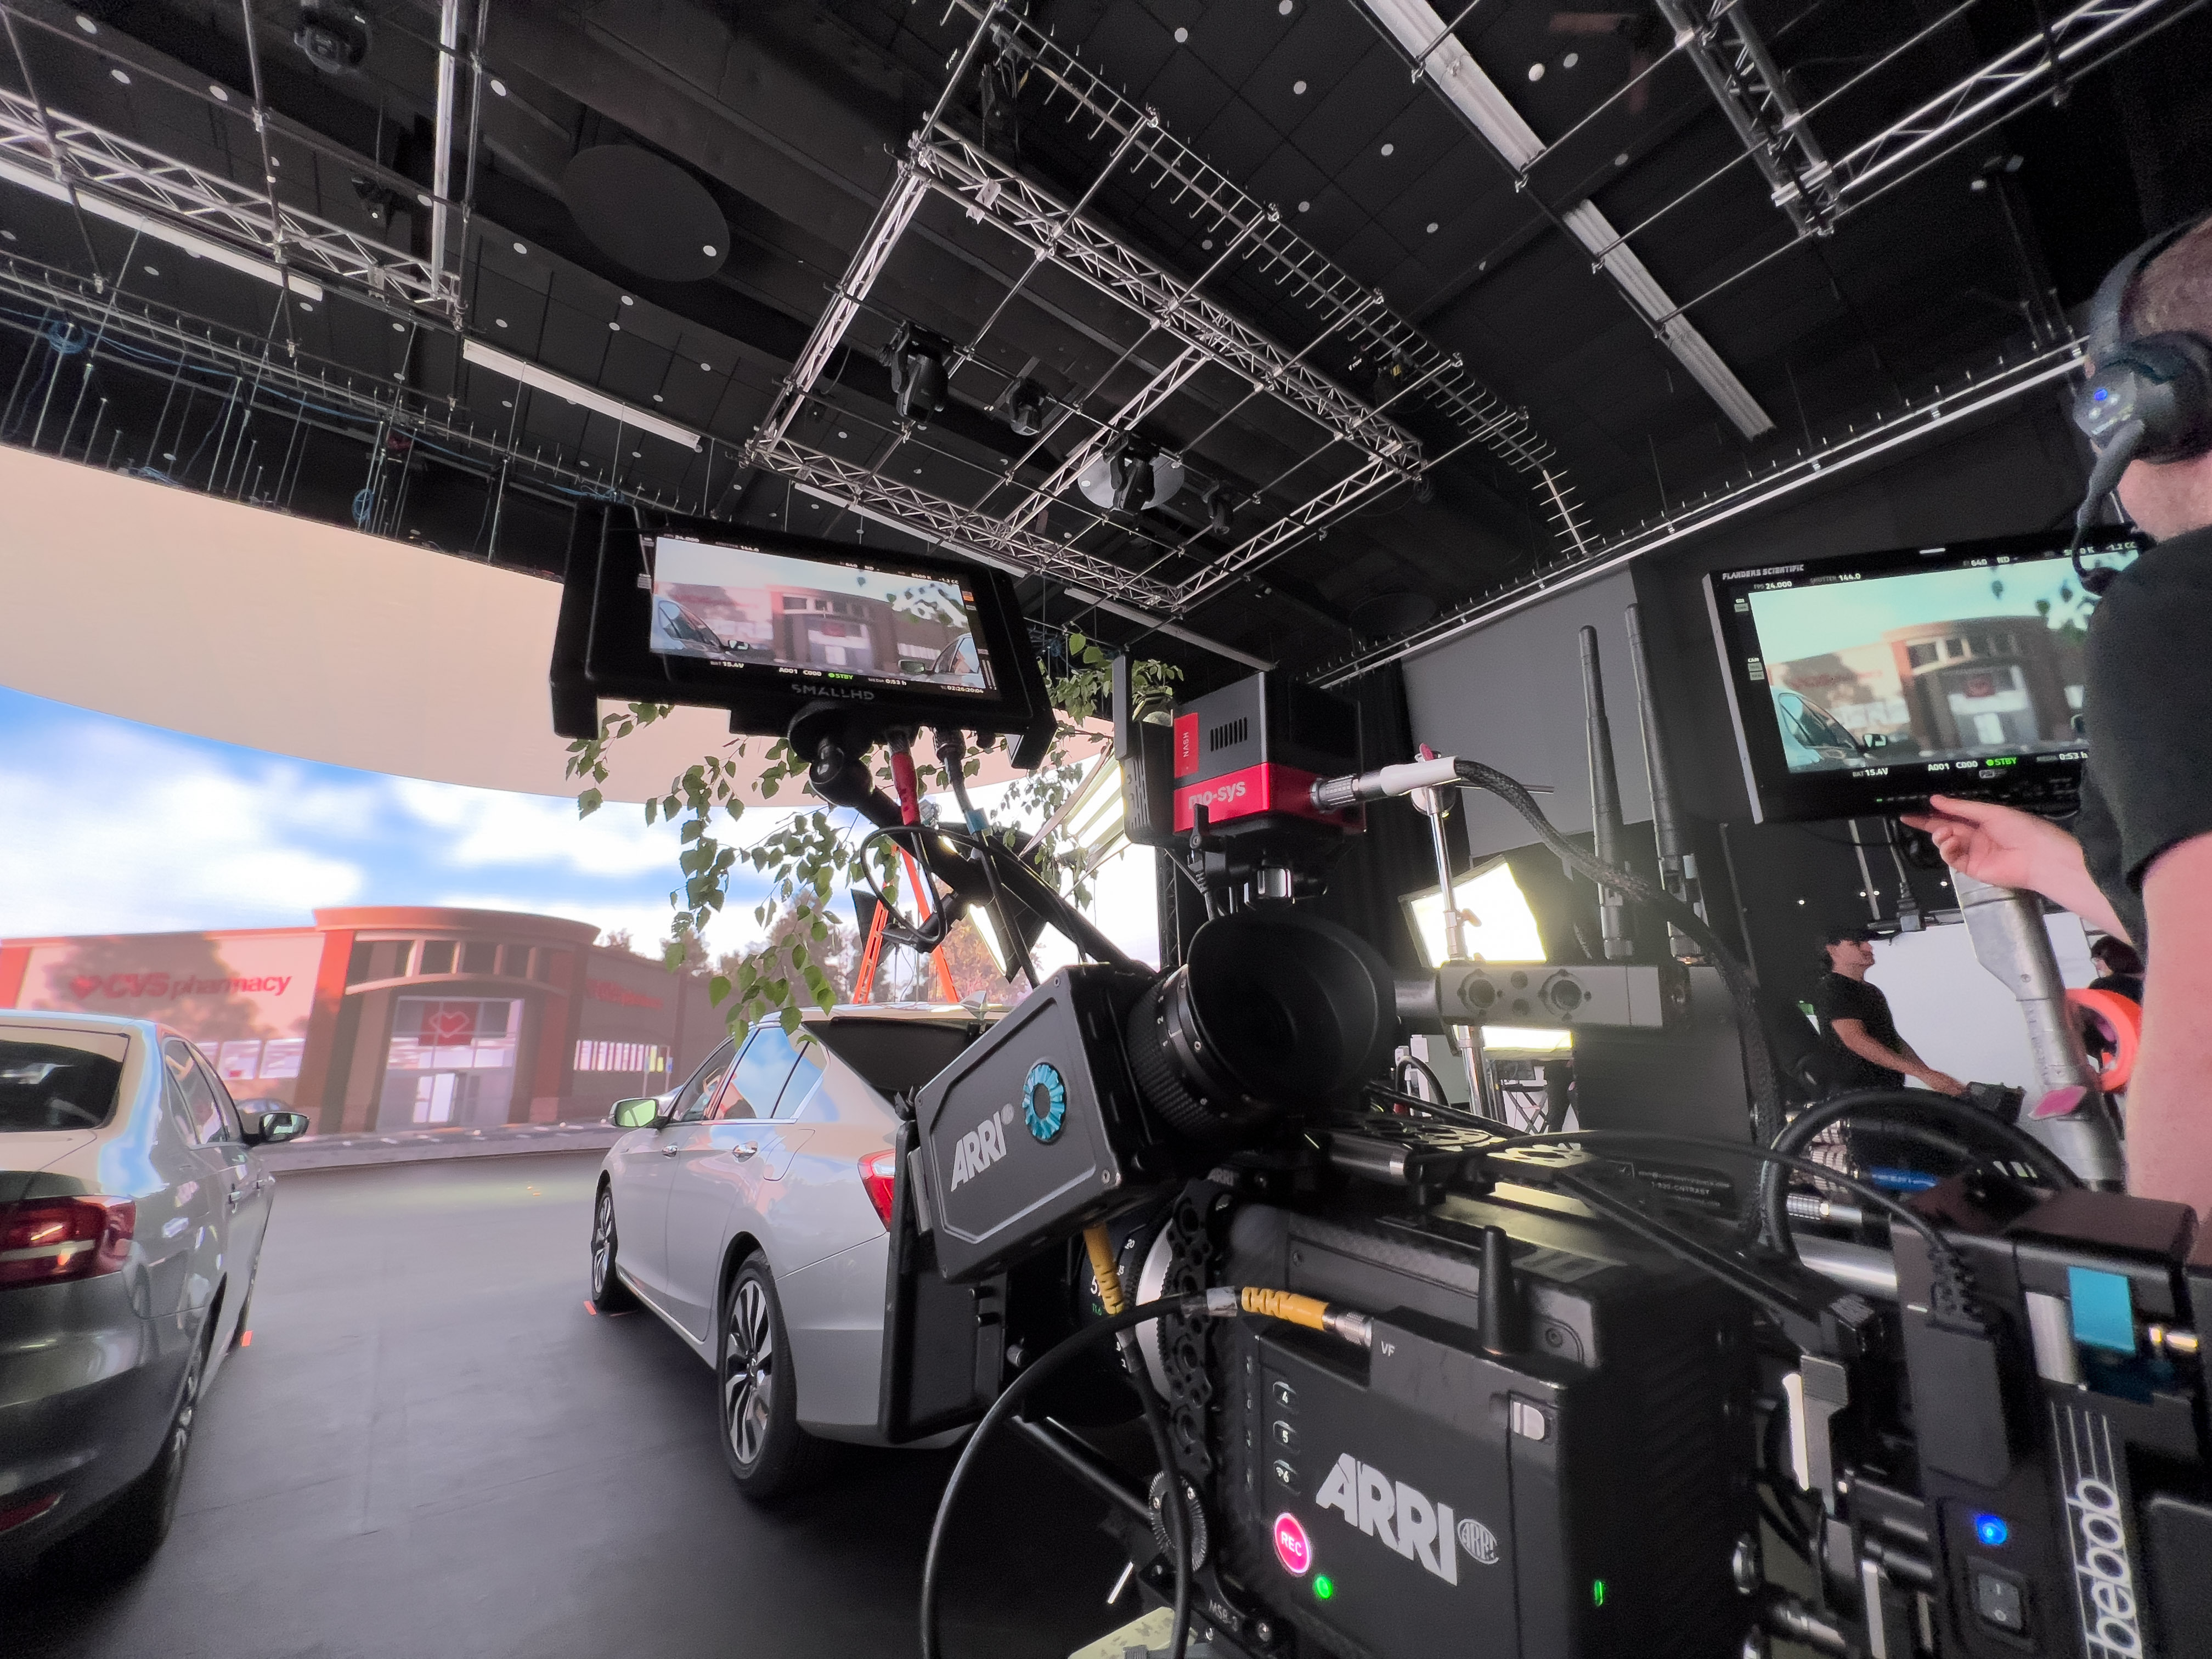 Video production team uses state-of-the-art technology to shoot for our client